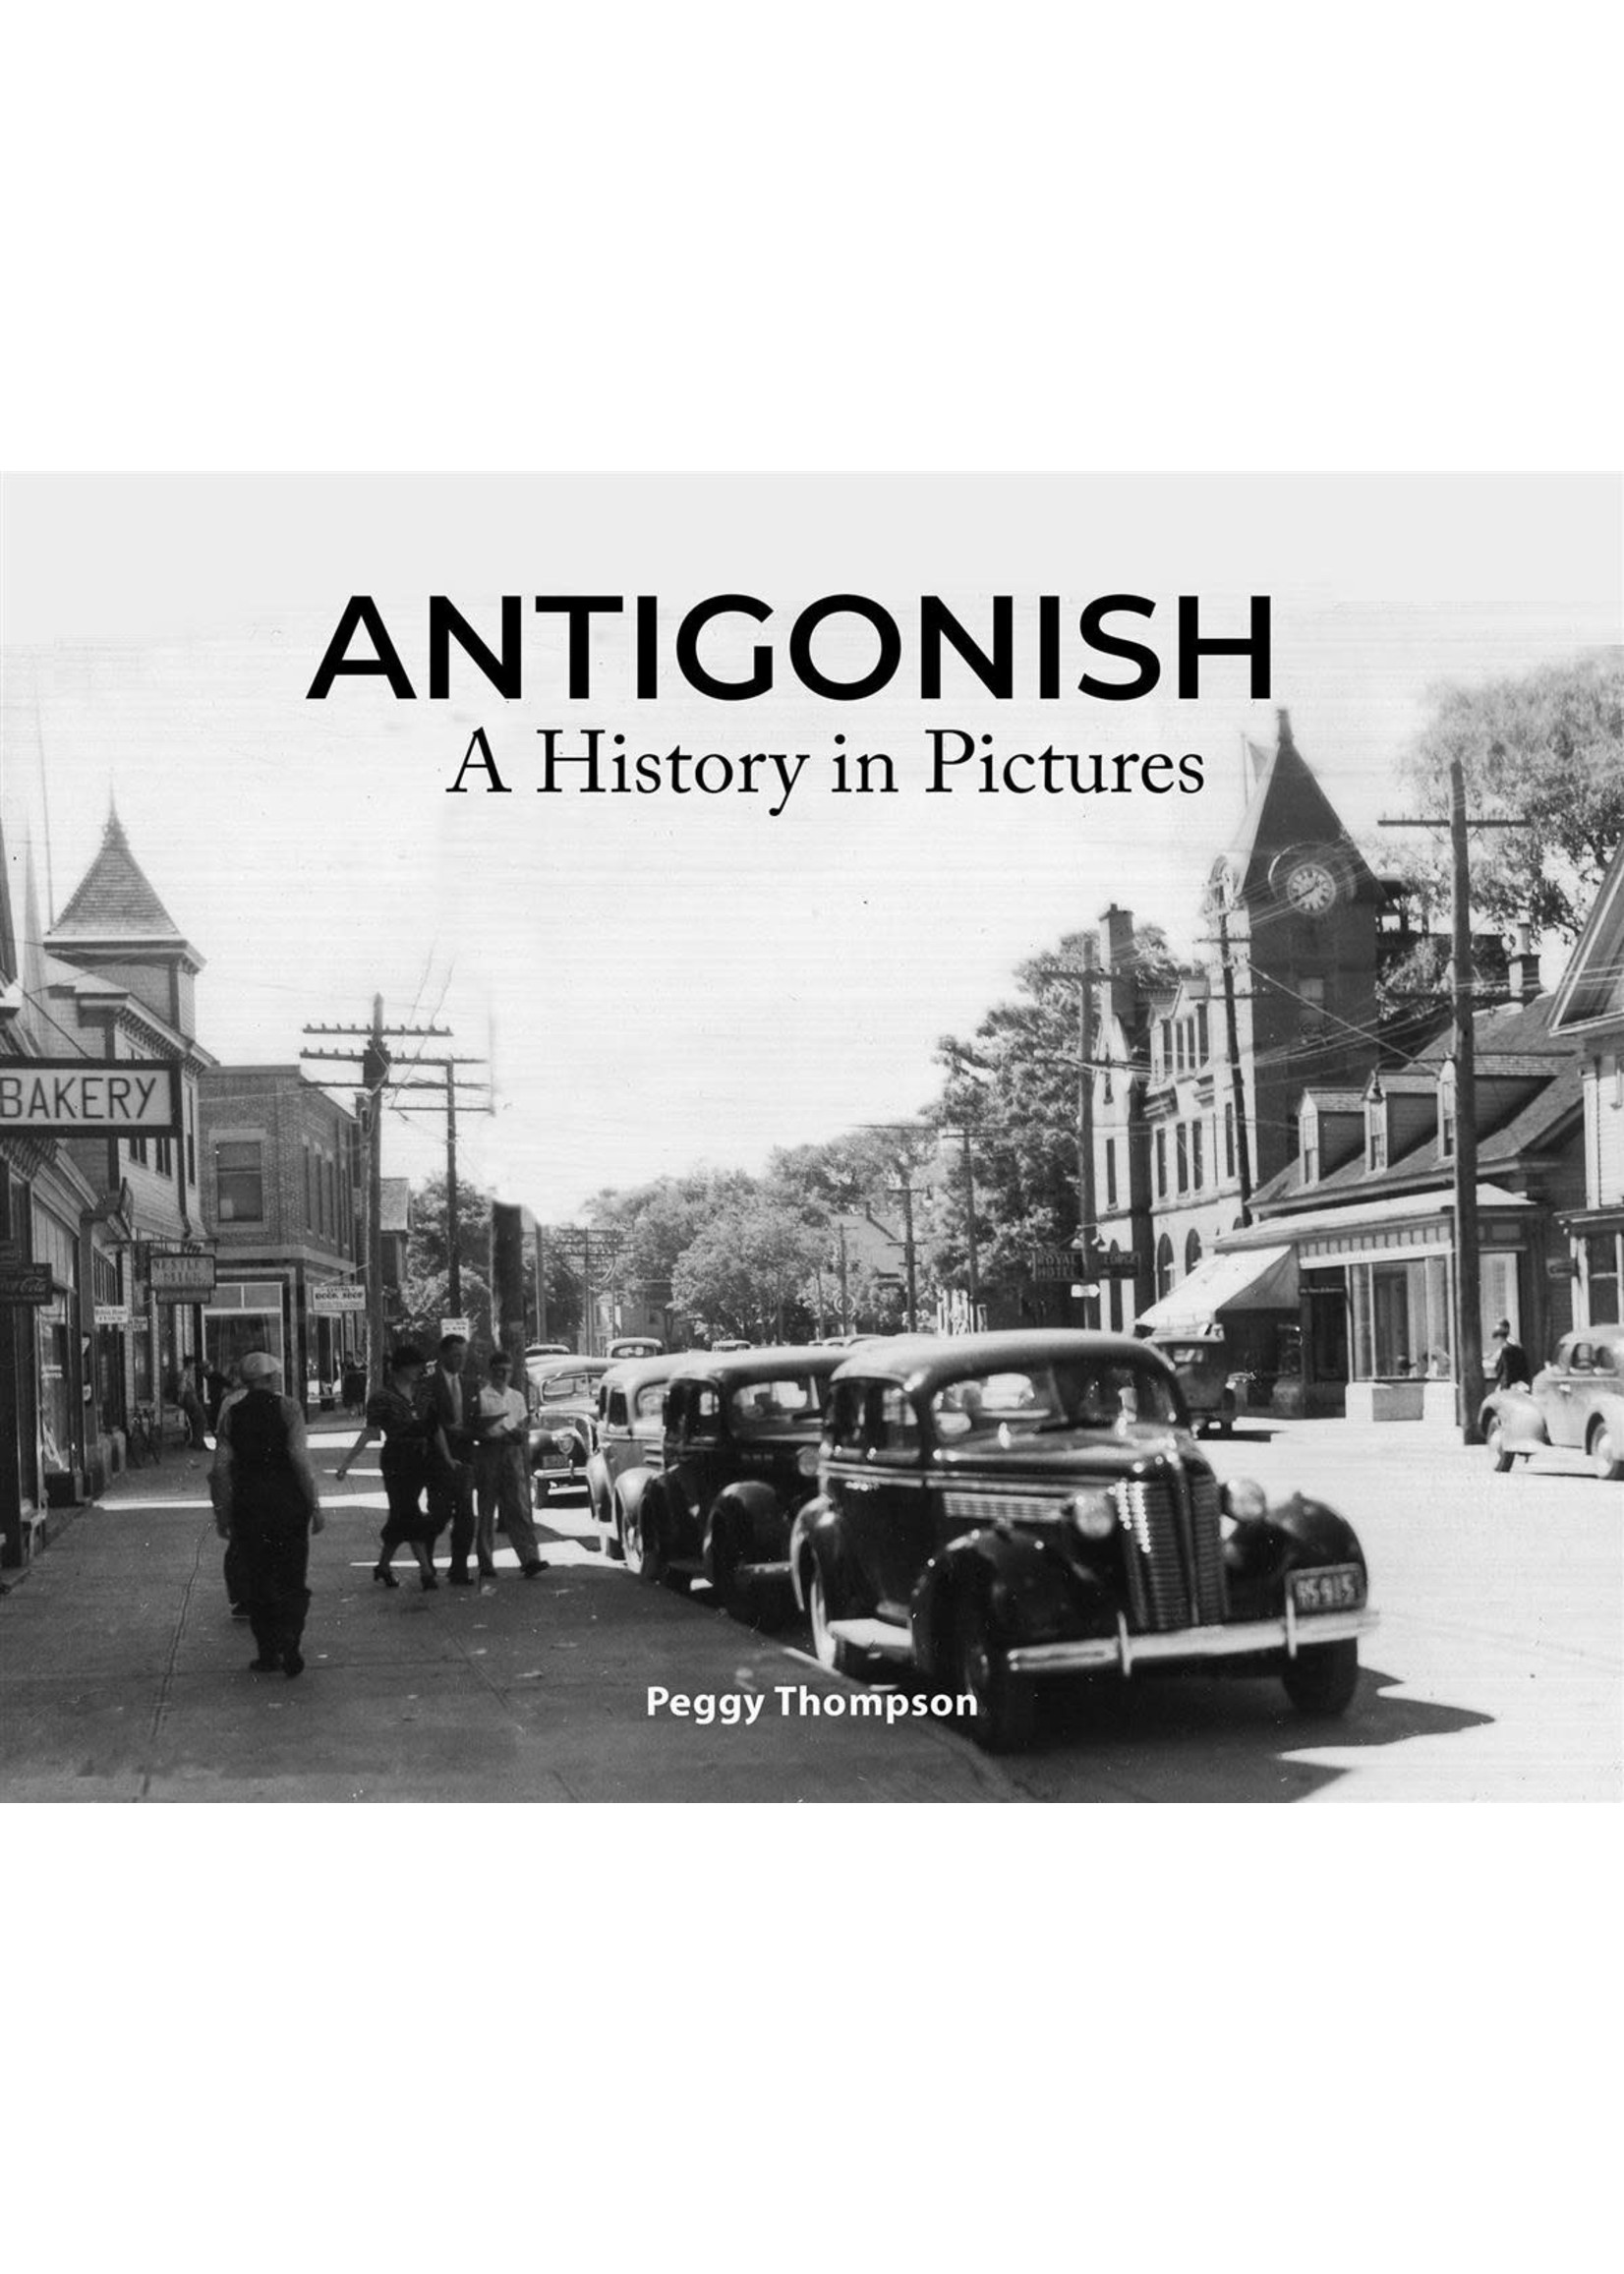 Antigonish: A History in Pictures by Peggy Thompson